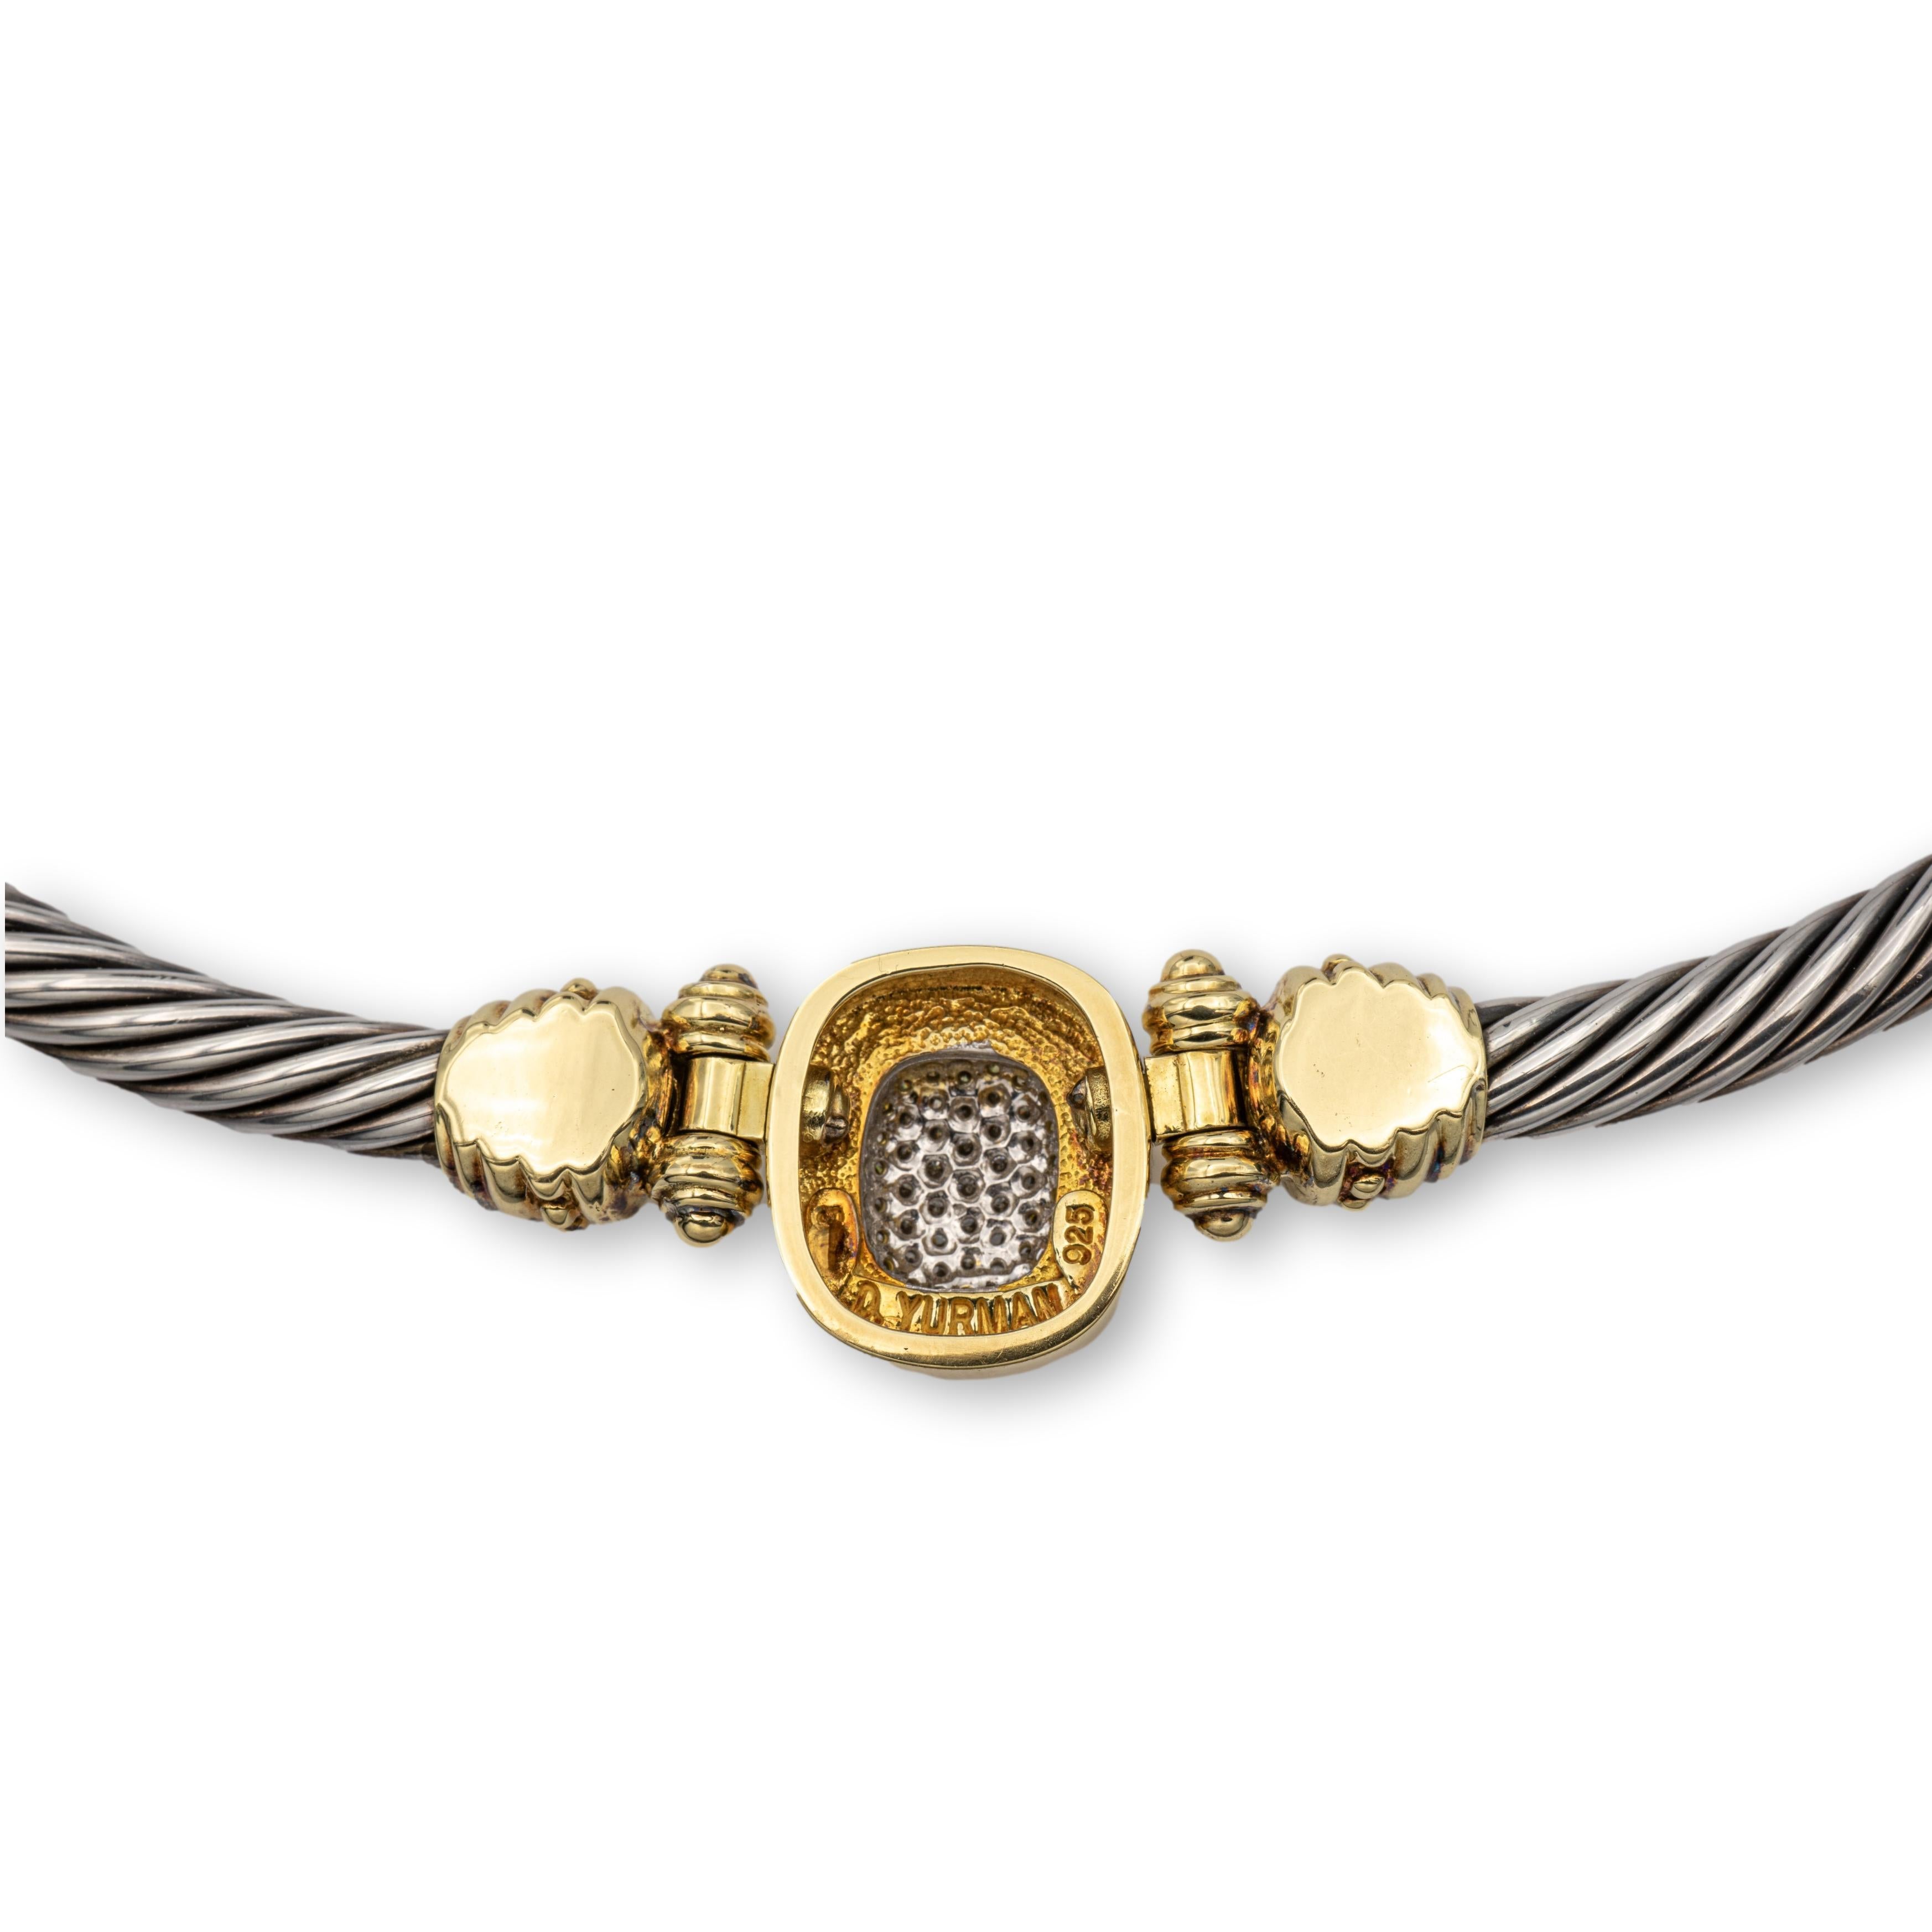 Vintage David Yurman choker necklace from the Albion collection finely crafted in sterling silver featuring a pendant with pave set round brilliant cut diamonds weighing 0.50 carats total weight approximately inside an 18 karat yellow gold bezel